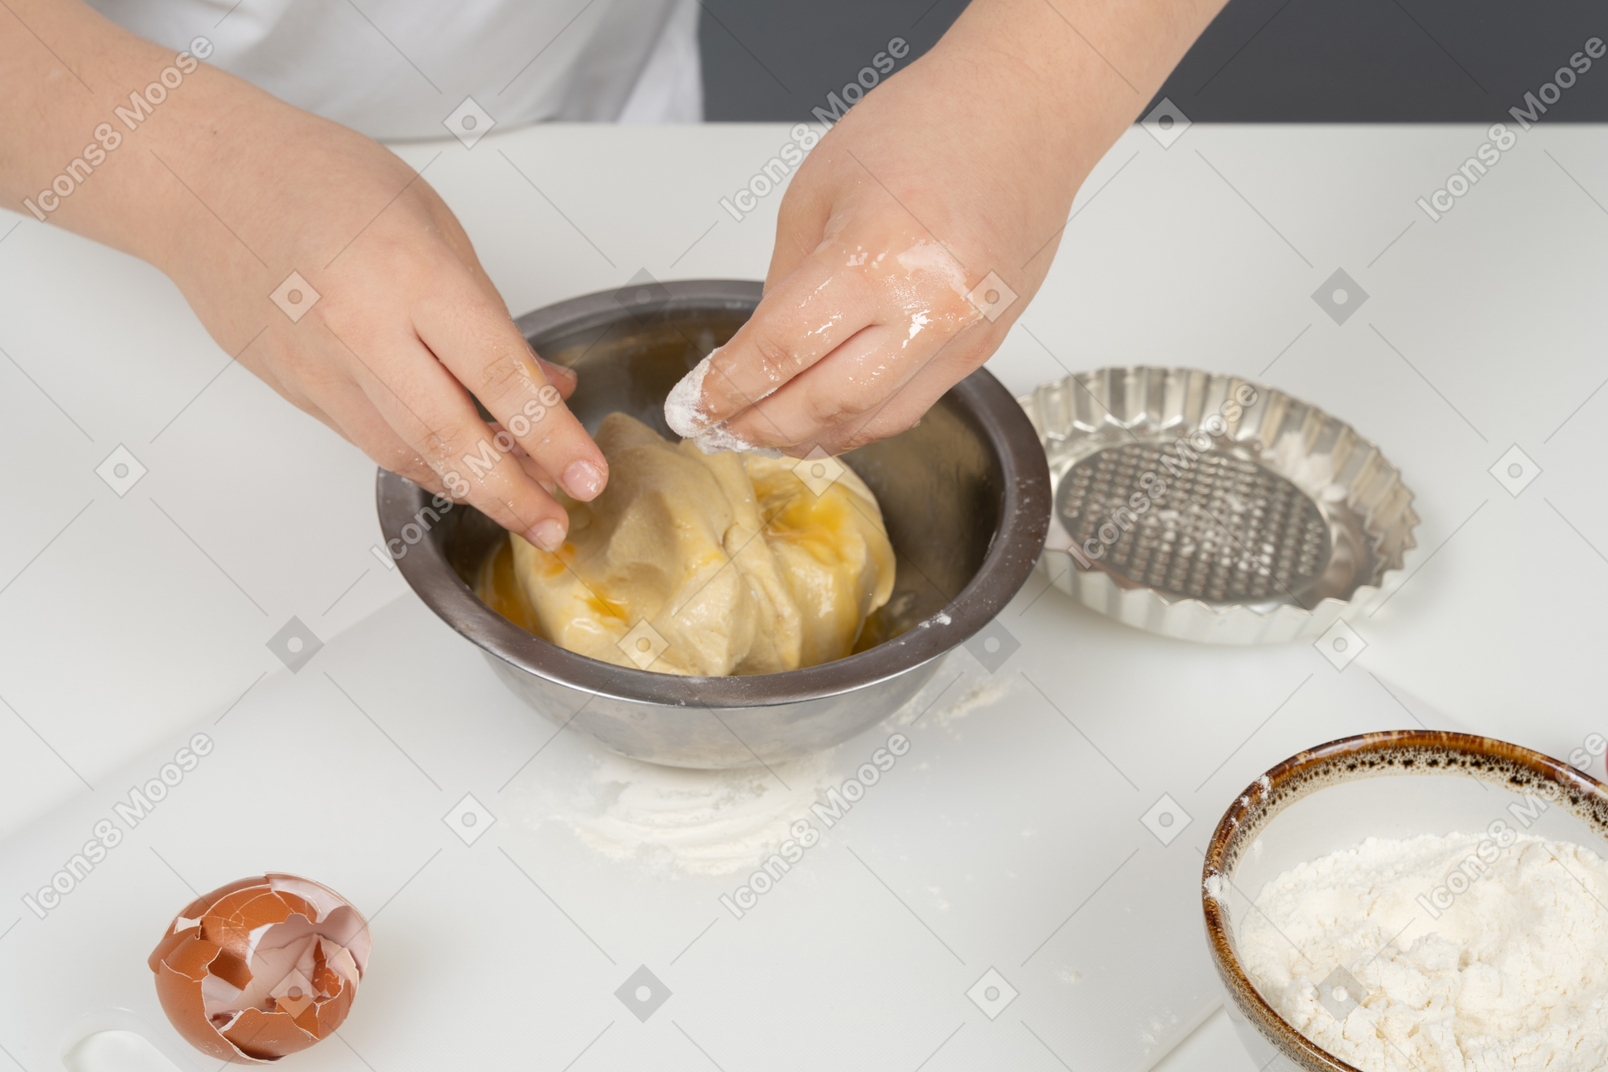 Mixing ingredients for a dough